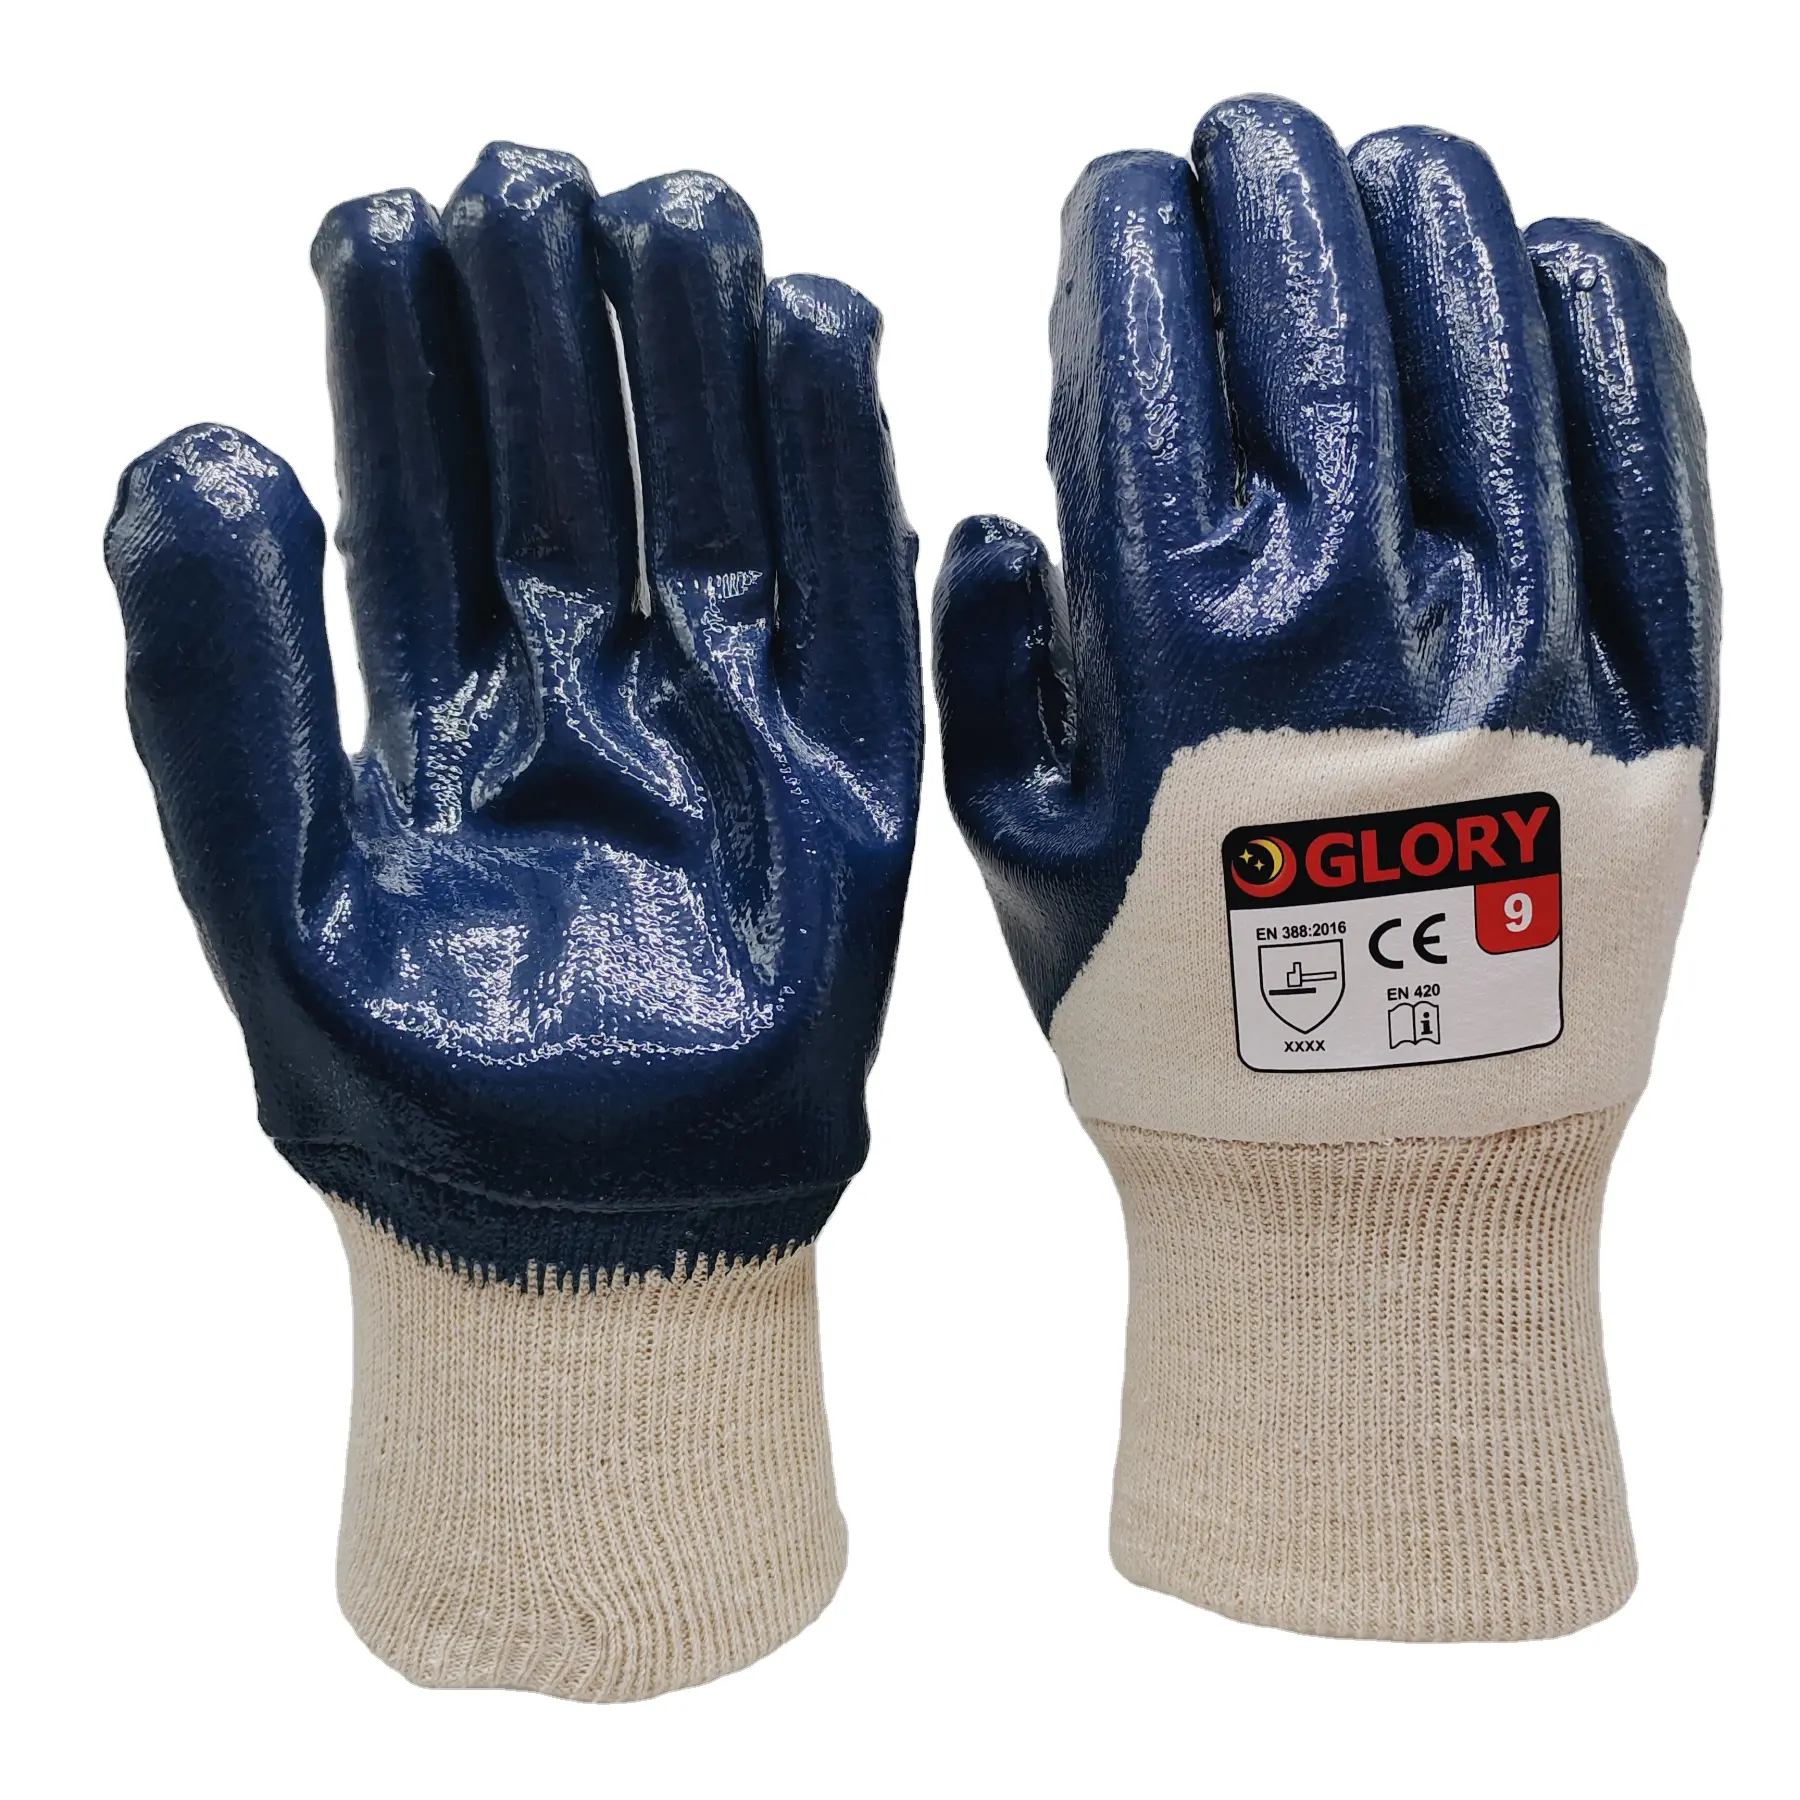 oil resistance NBR glove aerated back with knit cuff for heavy engineering work